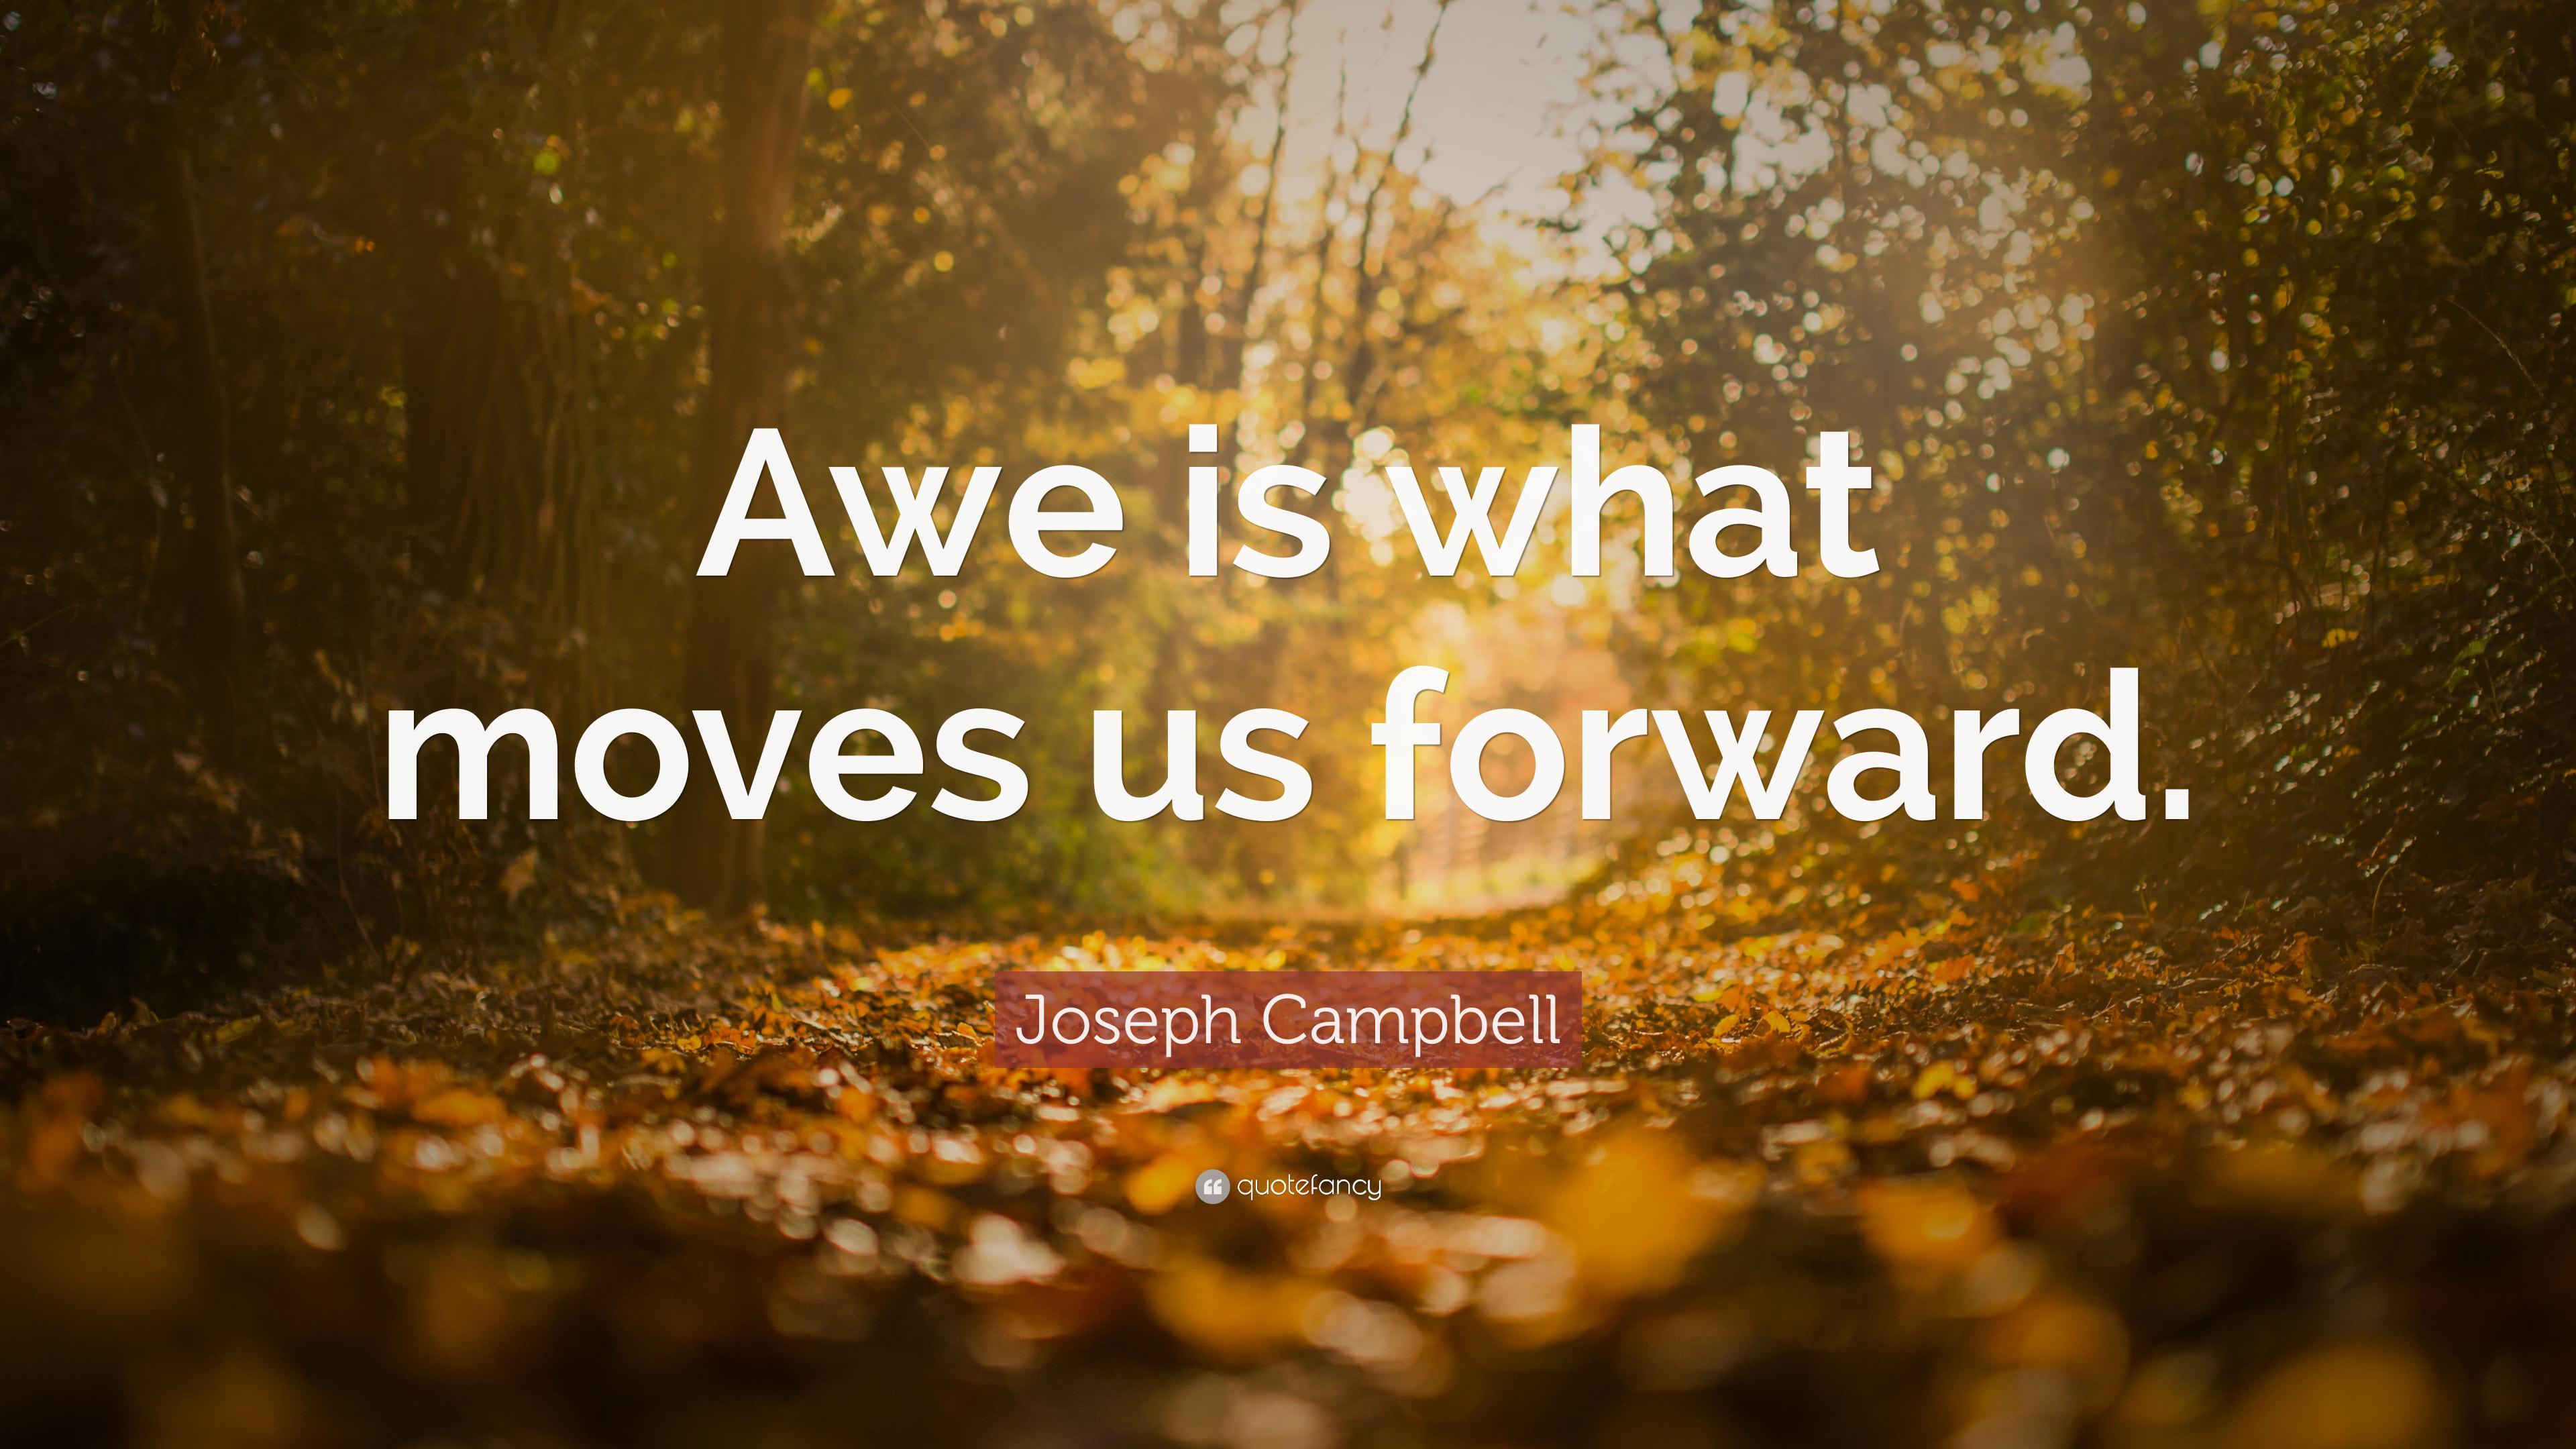 Joseph Campbell Quote: “Awe is what moves us forward.” 12